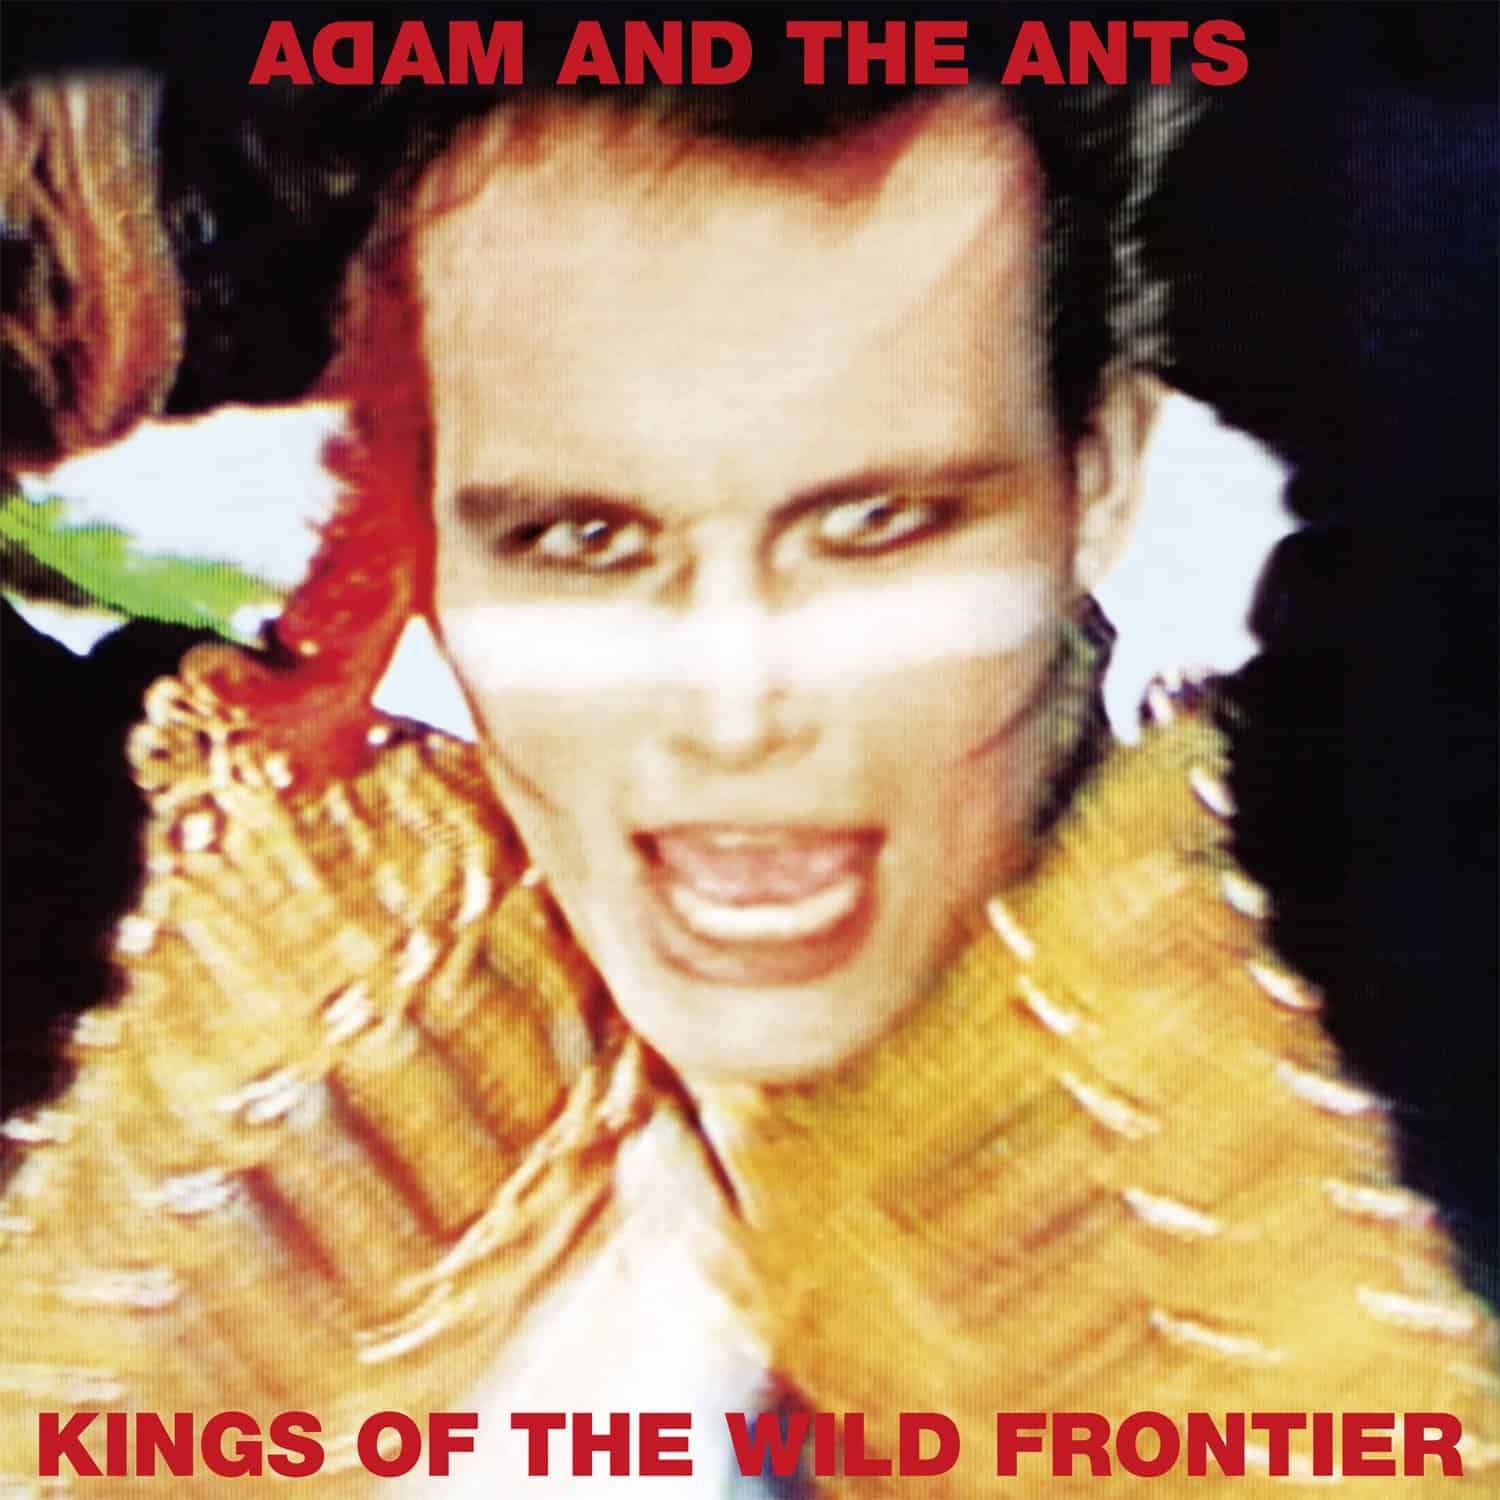 Adam-And-the-Ants-King-of-the-Wild-Frontier-vinyl-record-album-front